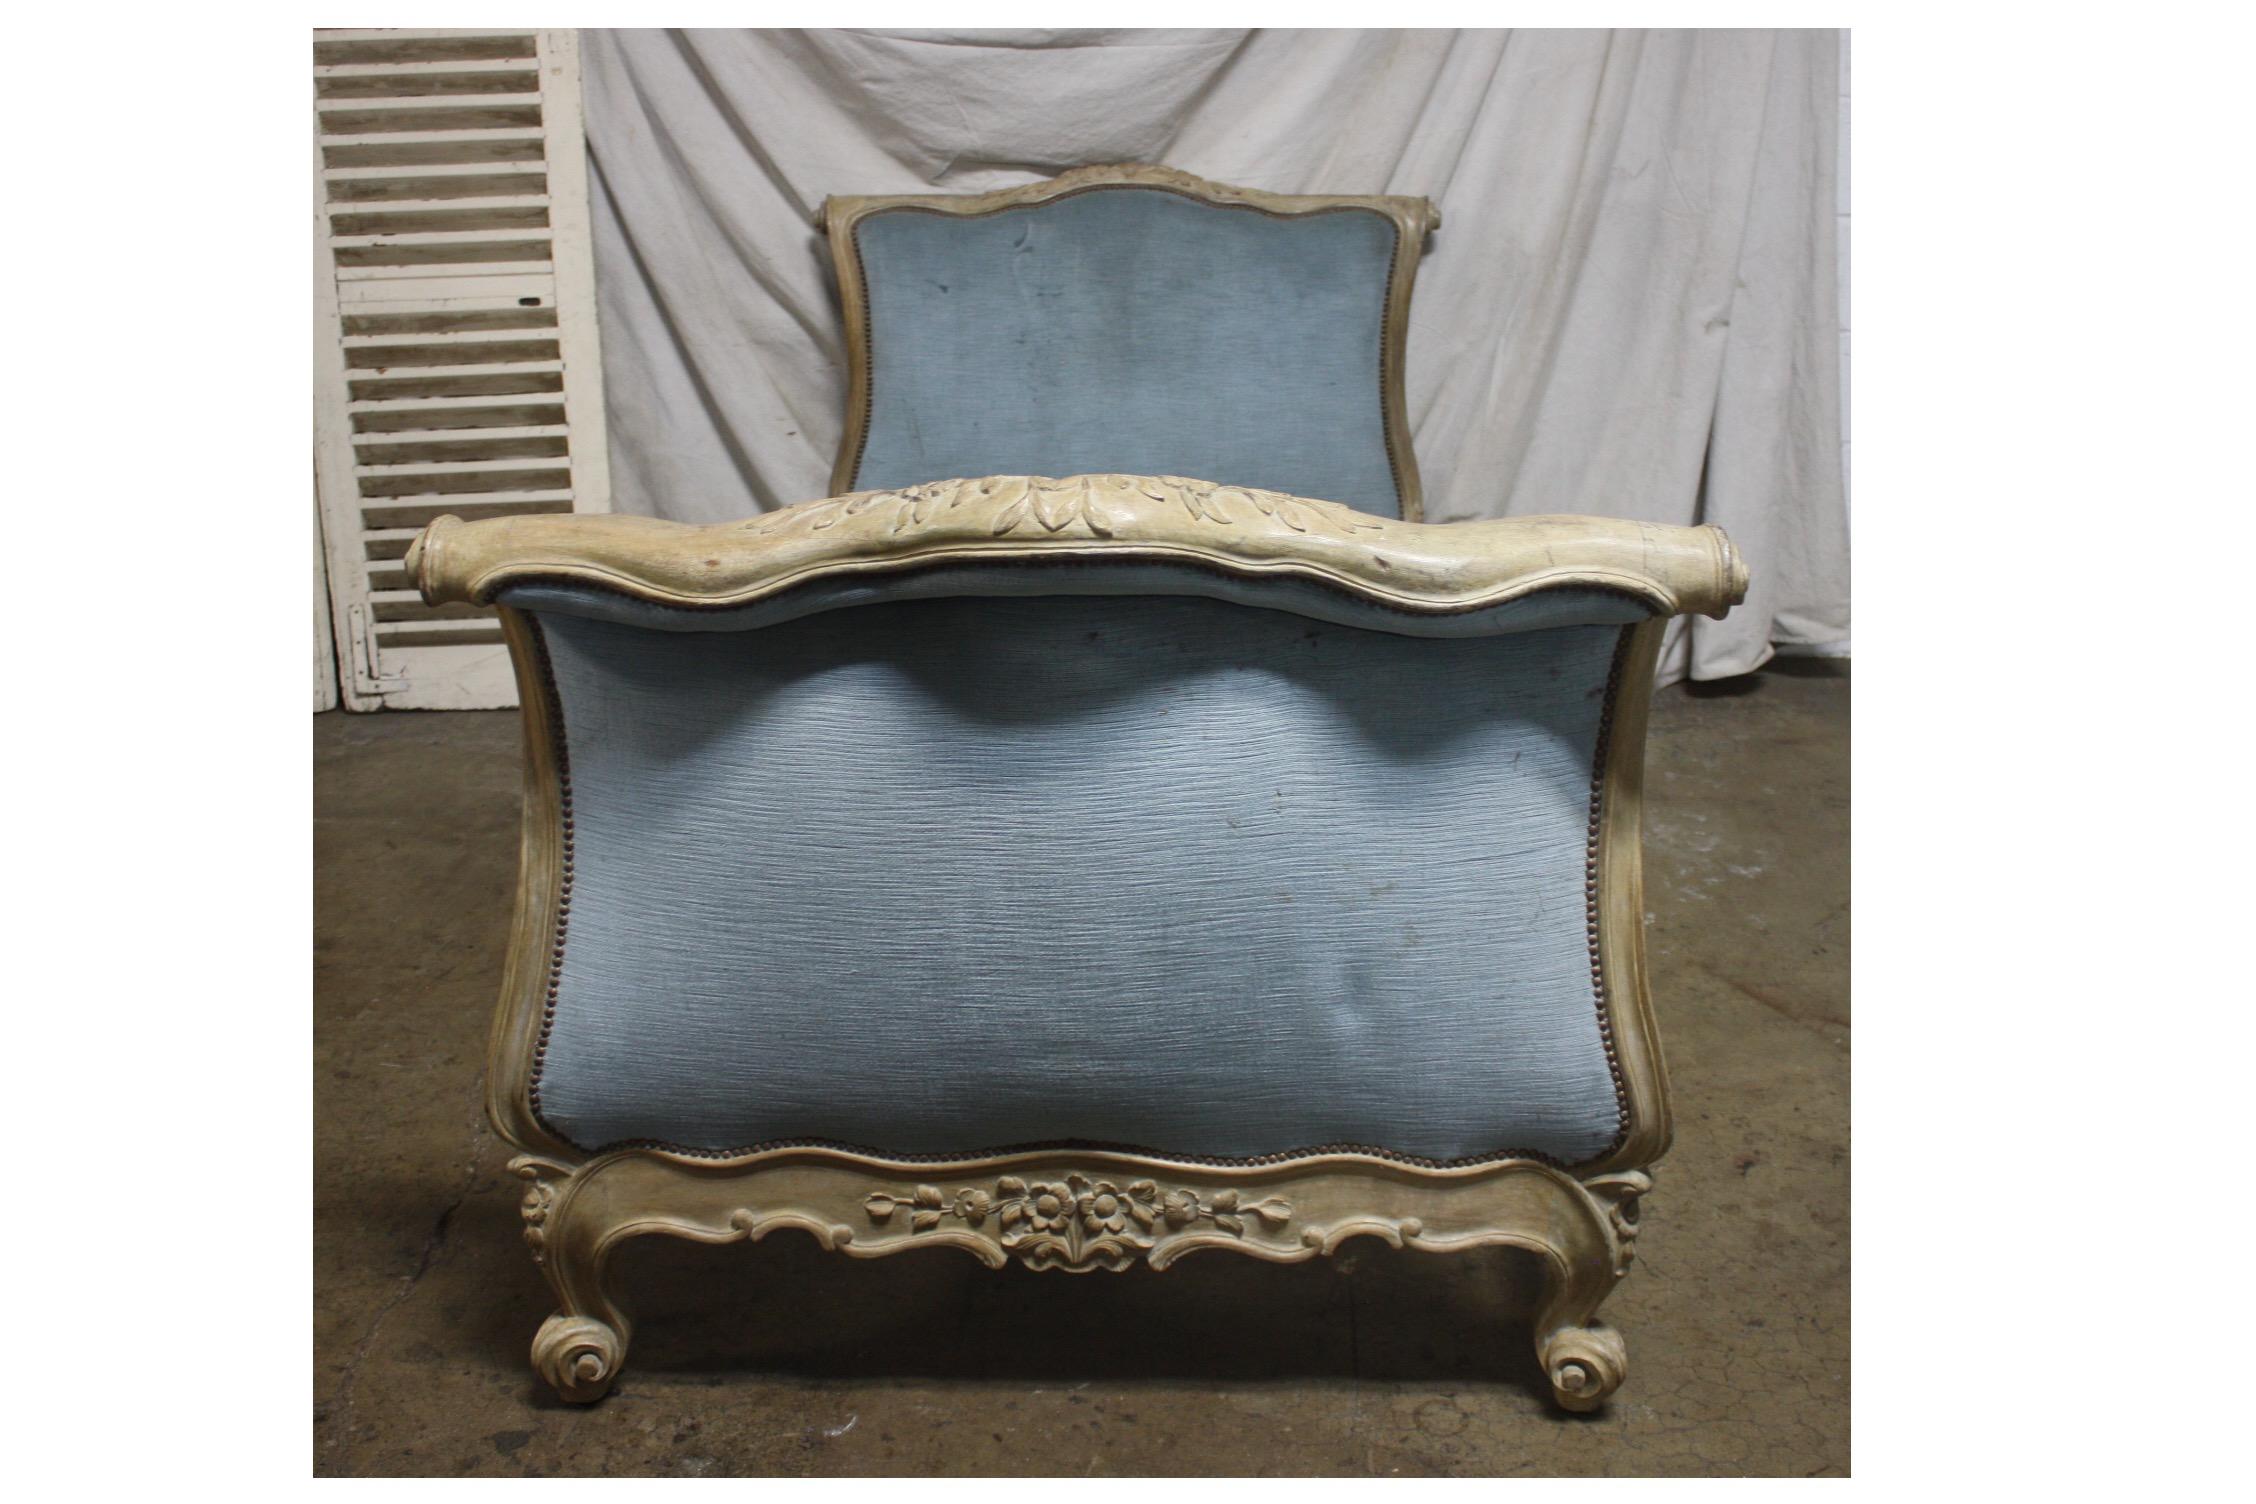 Magnificent 18th century French Louis XV period daybed.